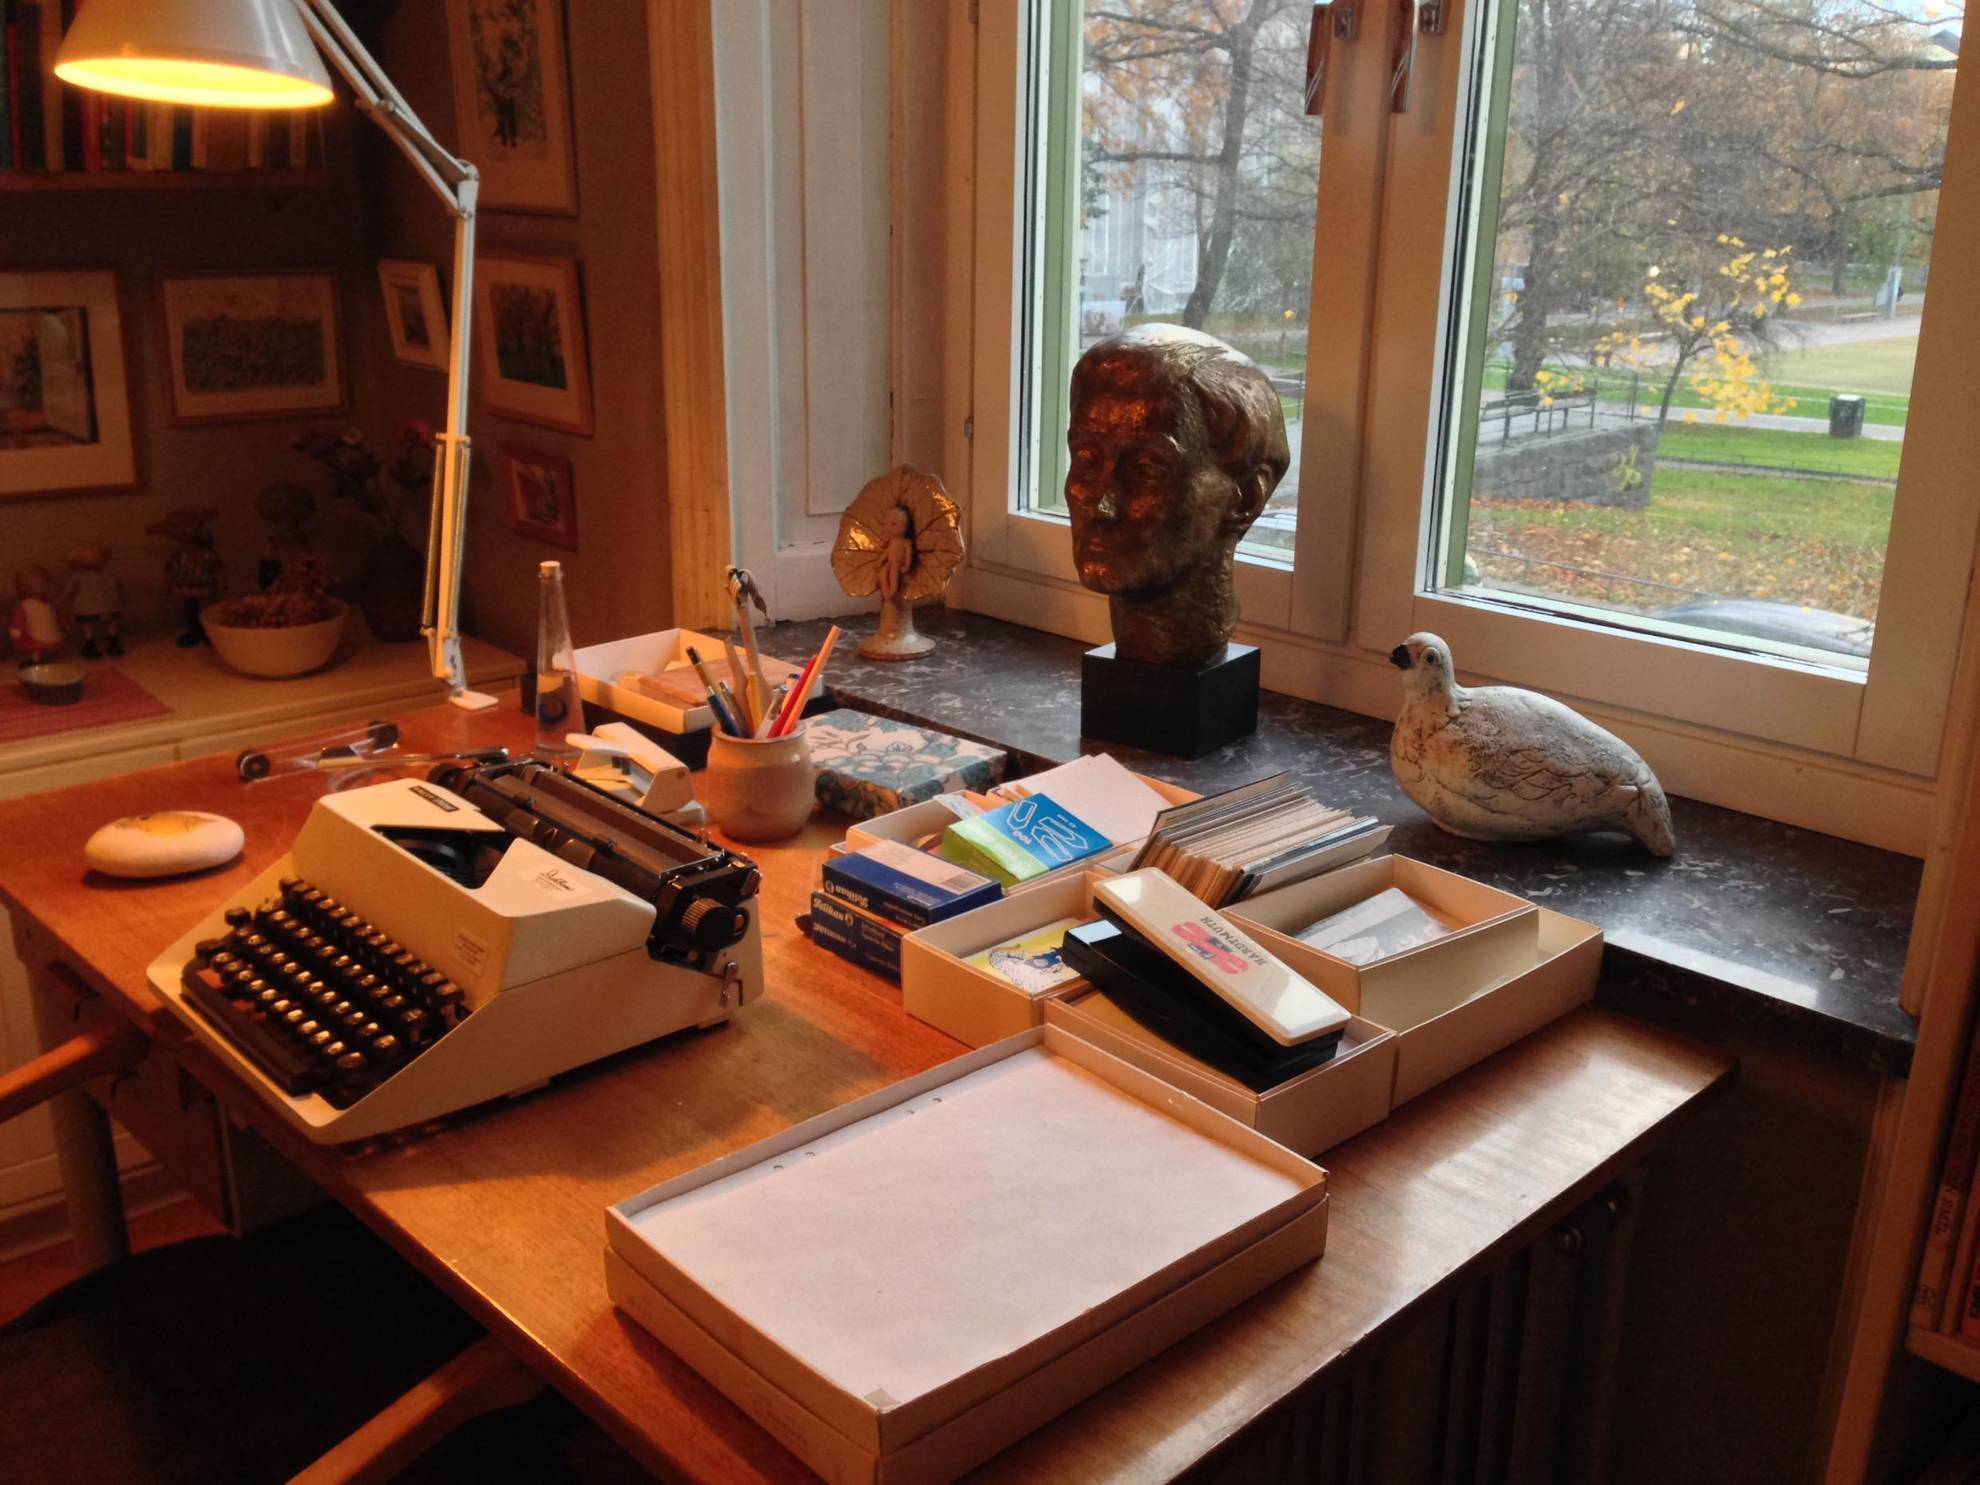 Author Astrid Lindgren's desk in Stockholm, filled with a typewriter, sheets of paper, a reading lamp and some decorations, with a view of a back garden.